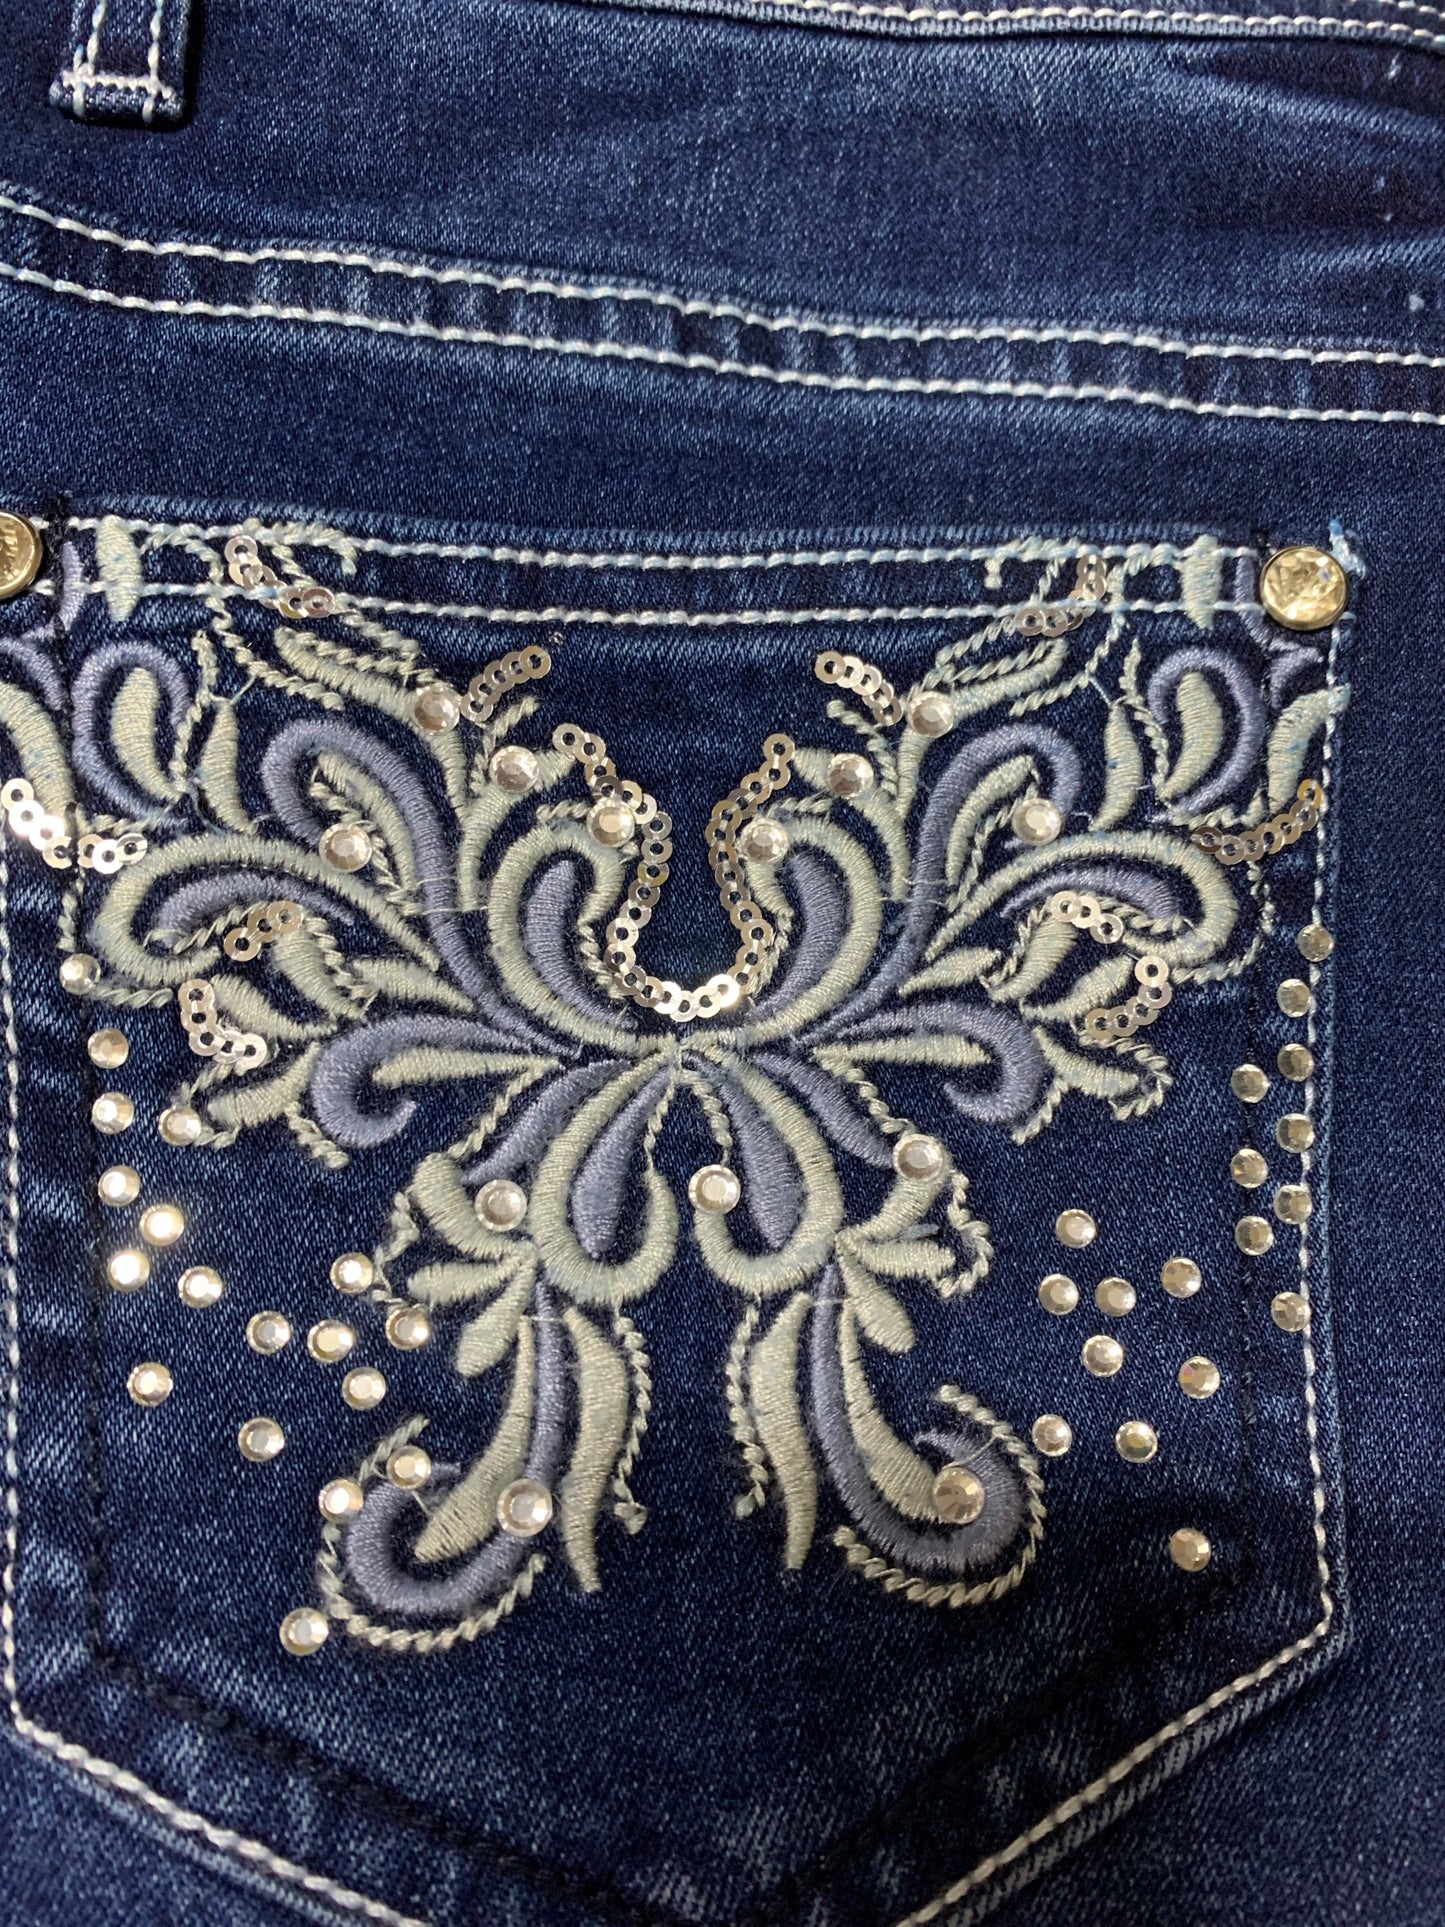 Outback Ladies Chrissy Bling Jeans- ON SALE